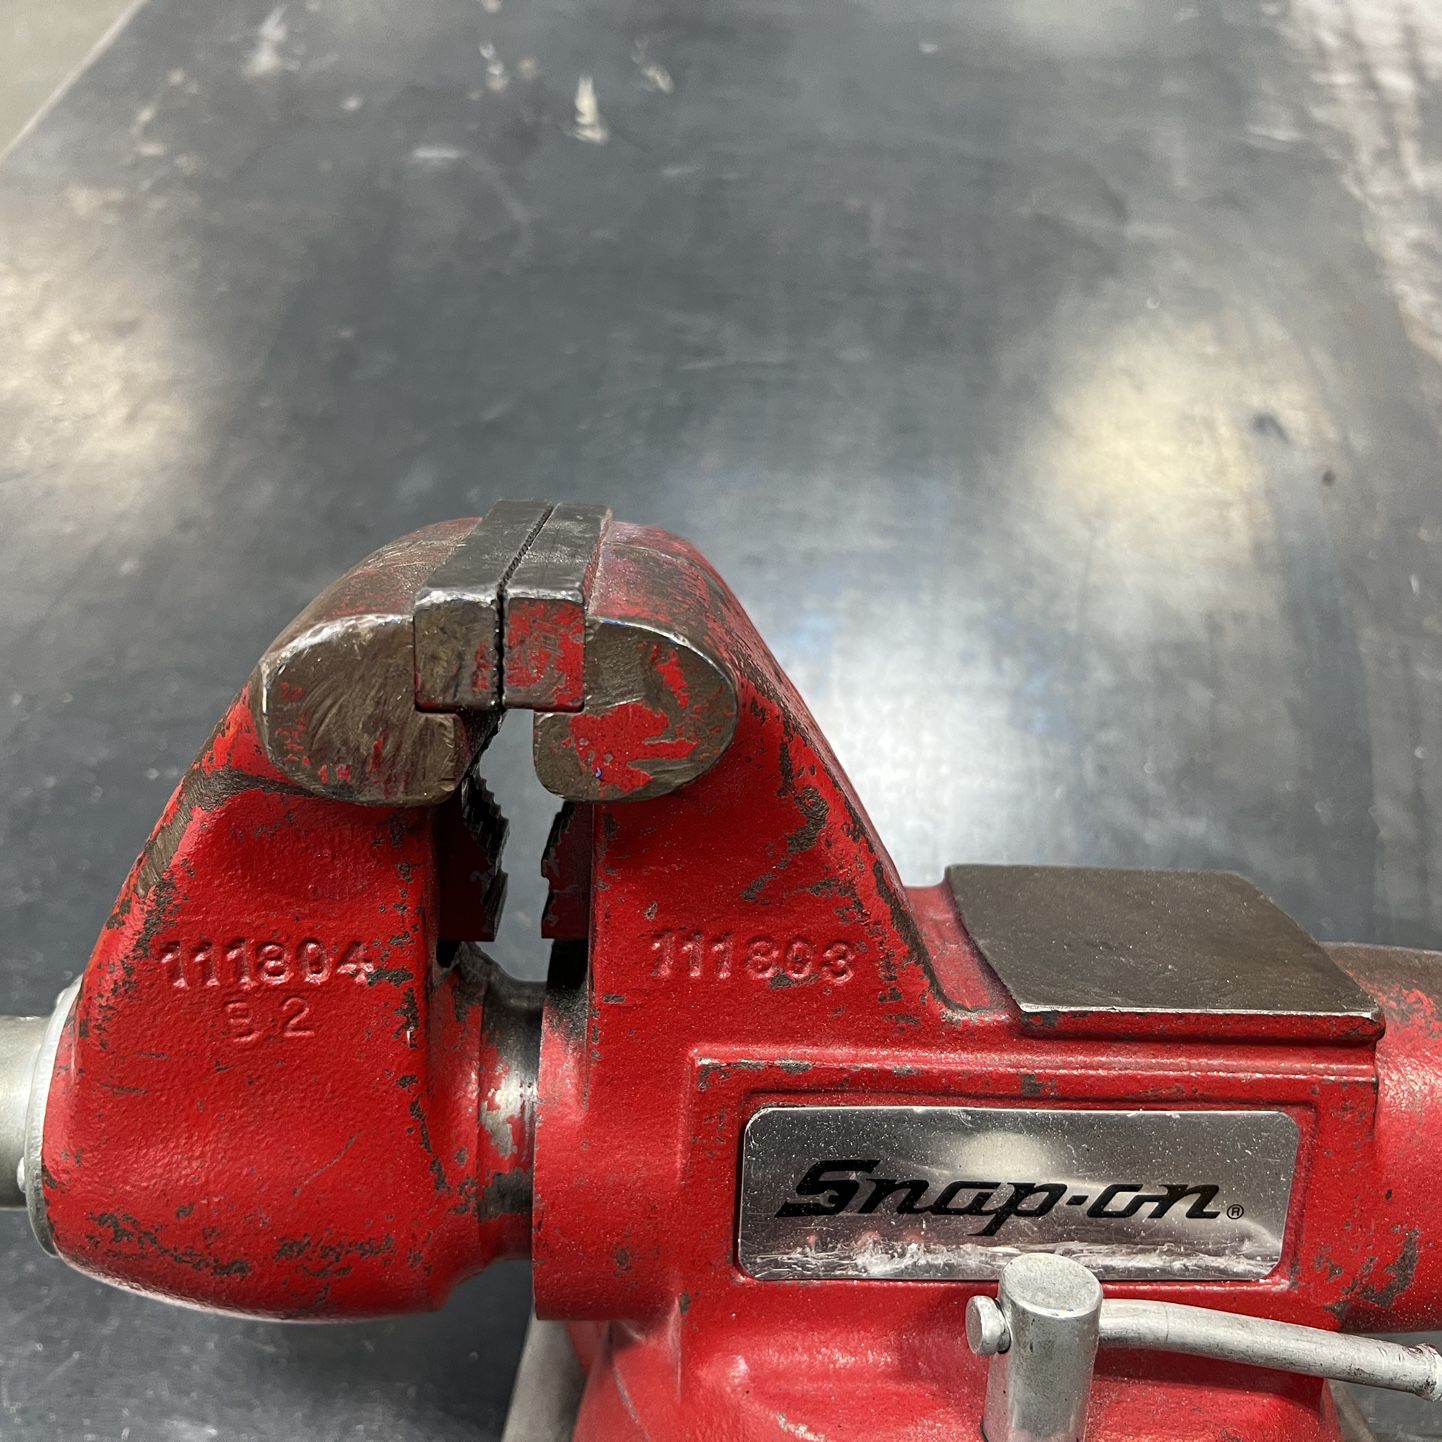 4 1/2 inch Bench Vise Snap On Made by Wilton